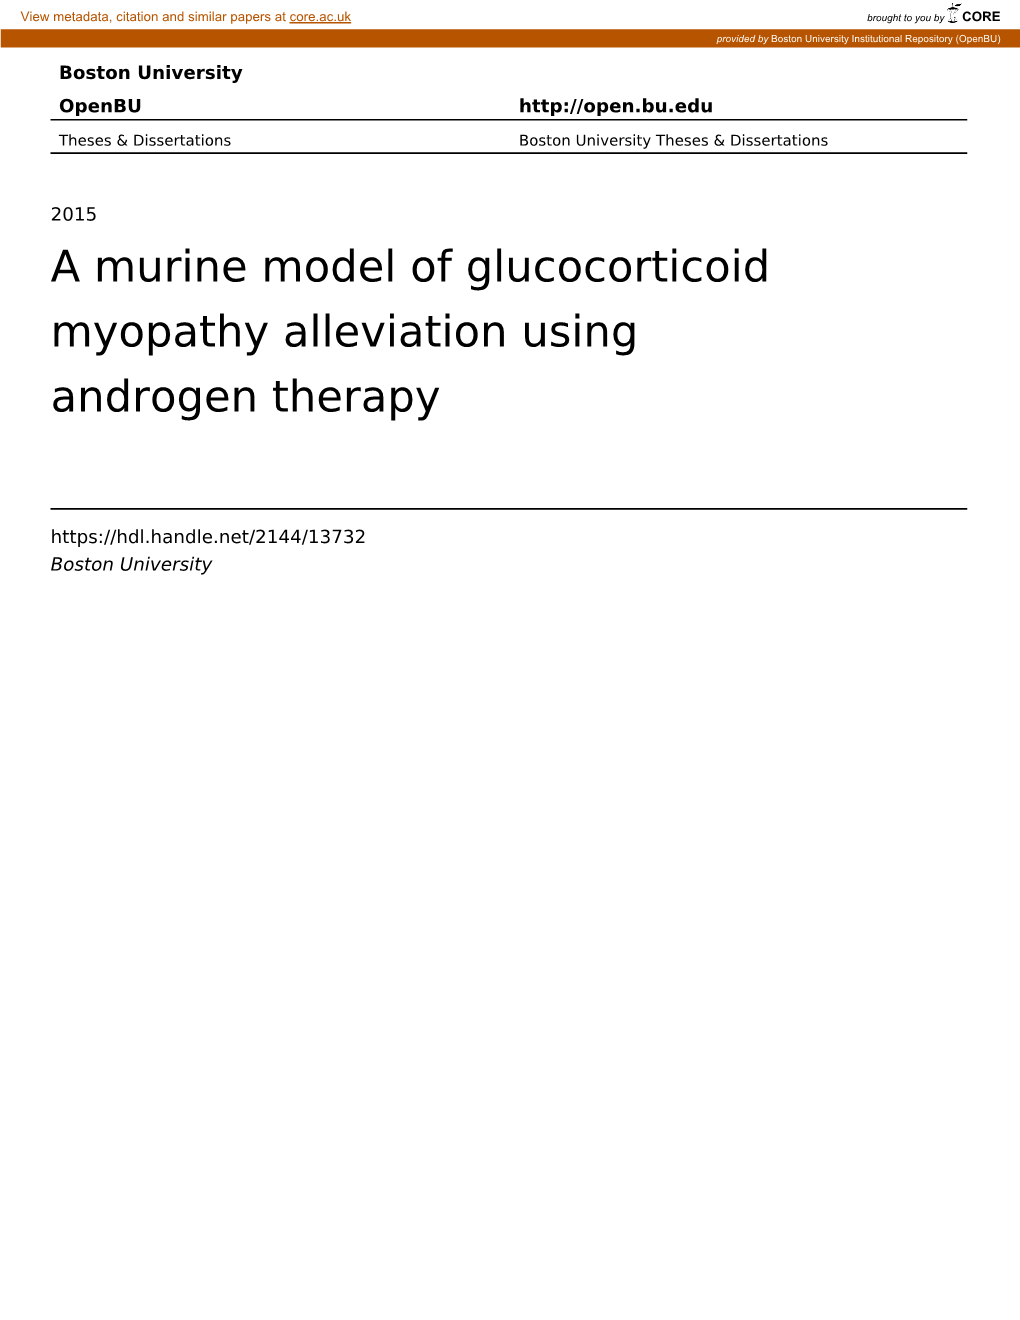 A Murine Model of Glucocorticoid Myopathy Alleviation Using Androgen Therapy